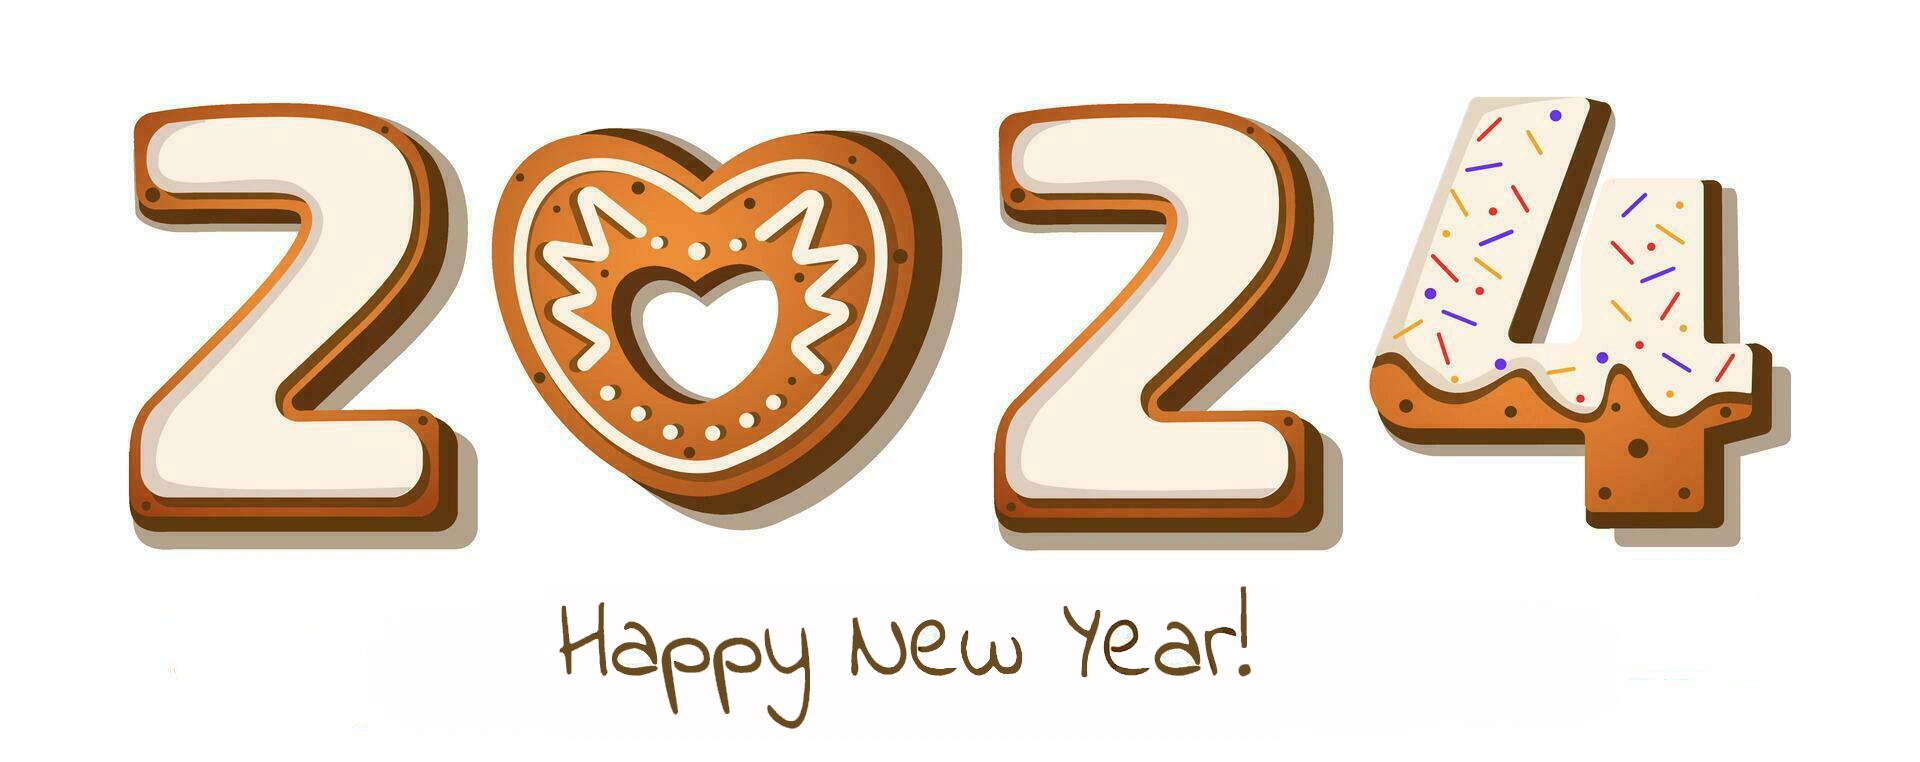 gingerbread cookies in the form of numbers 2024 in cartoon style on a white background vector